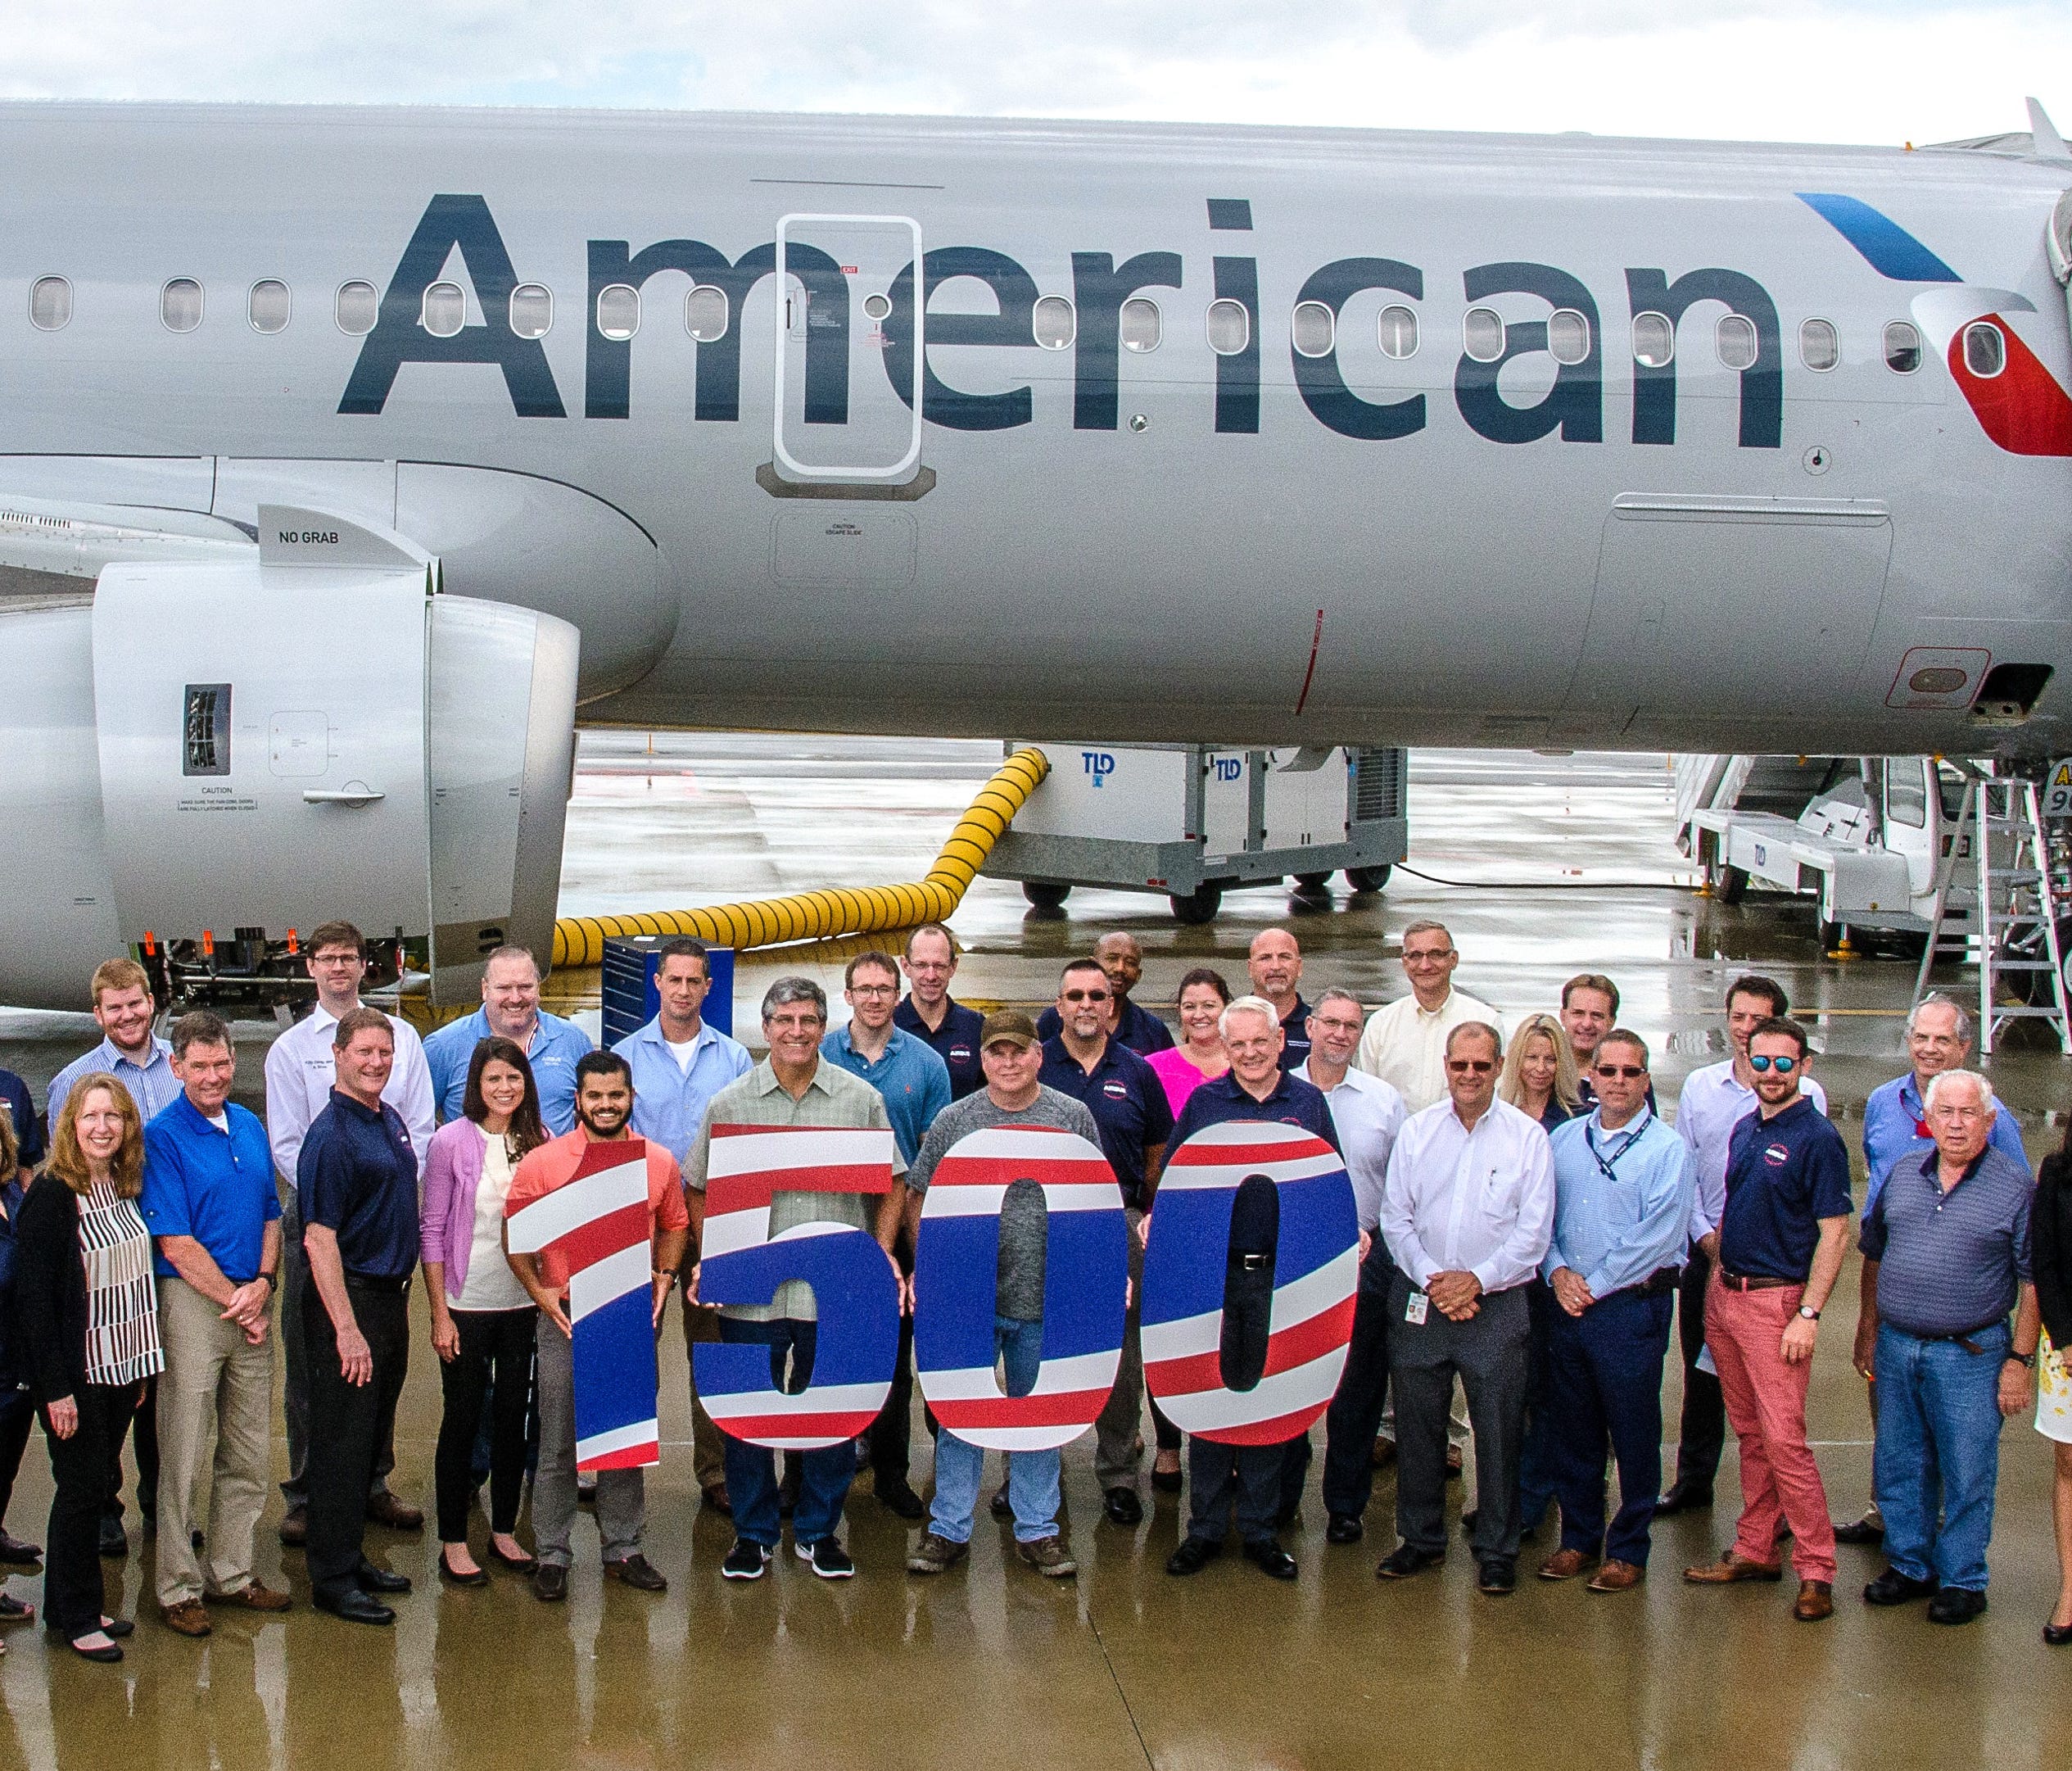 Airbus says it now has 1,500 planes in service at U.S. and Canadian airlines. It celebrated the milestone in September 2017 with a delivery of an Airbus A321 to American Airlines at the jetmaker's assembly line in Mobile, Ala.